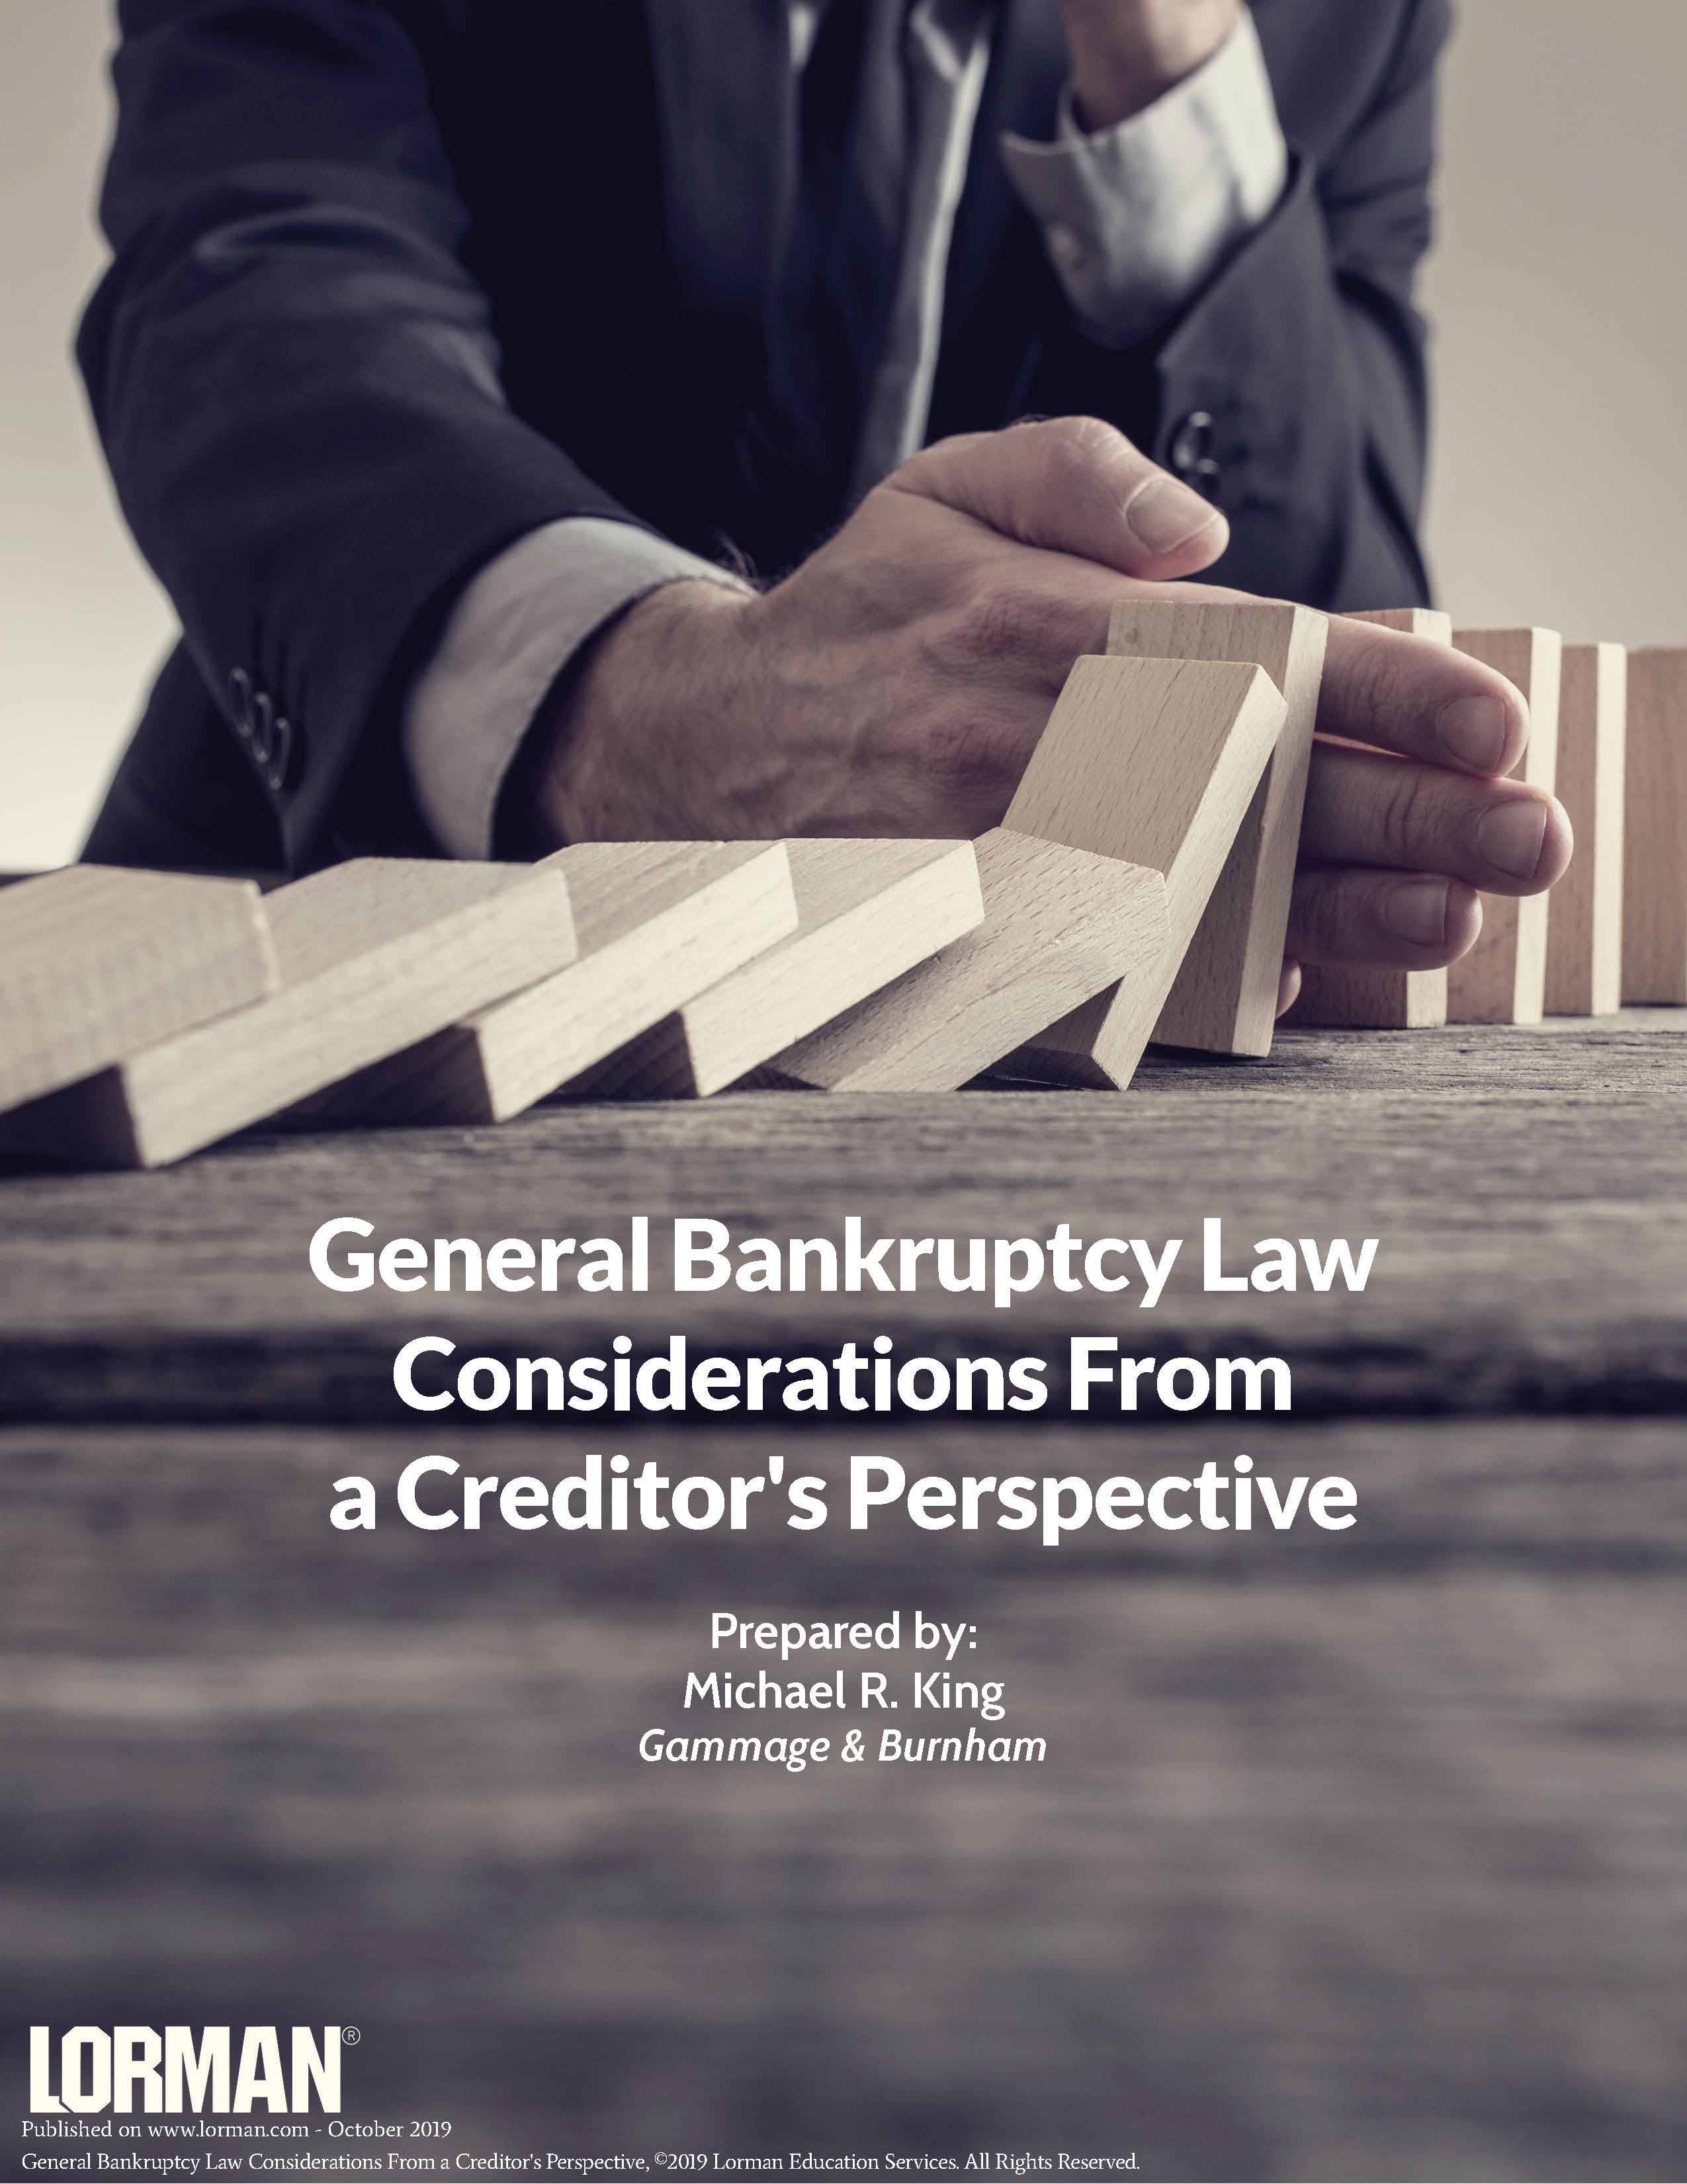 General Bankruptcy Law Considerations From a Creditor's Perspective